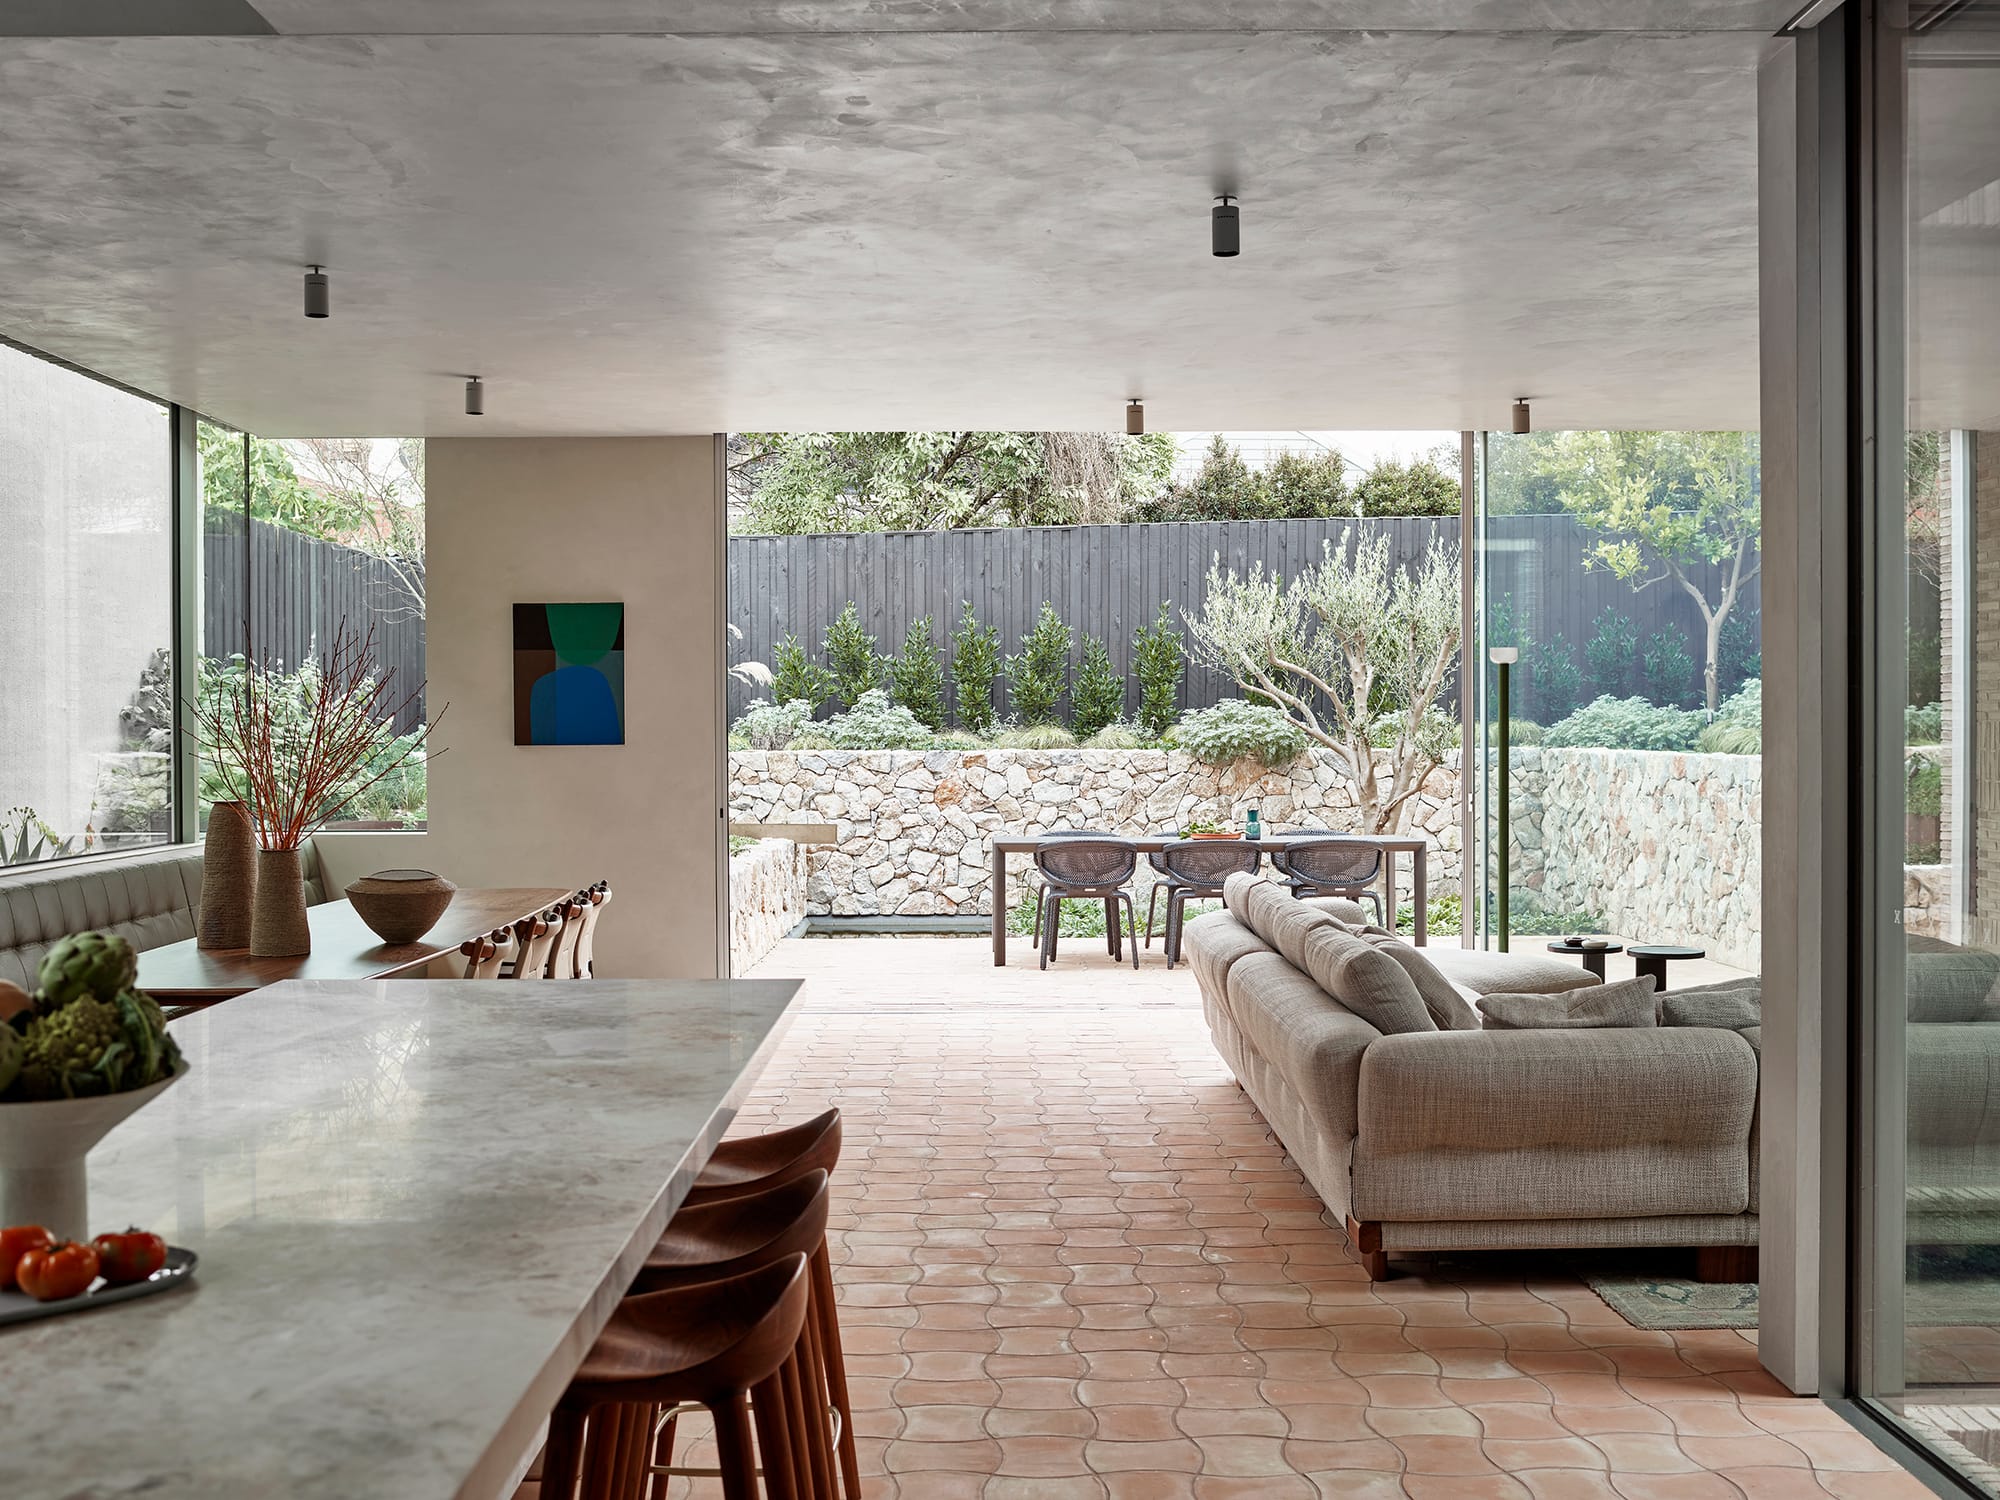 Terra Firma by RobsonRak. Photography by Mark Roper showing the interior of the open living space of this new house and the connection to the backyard